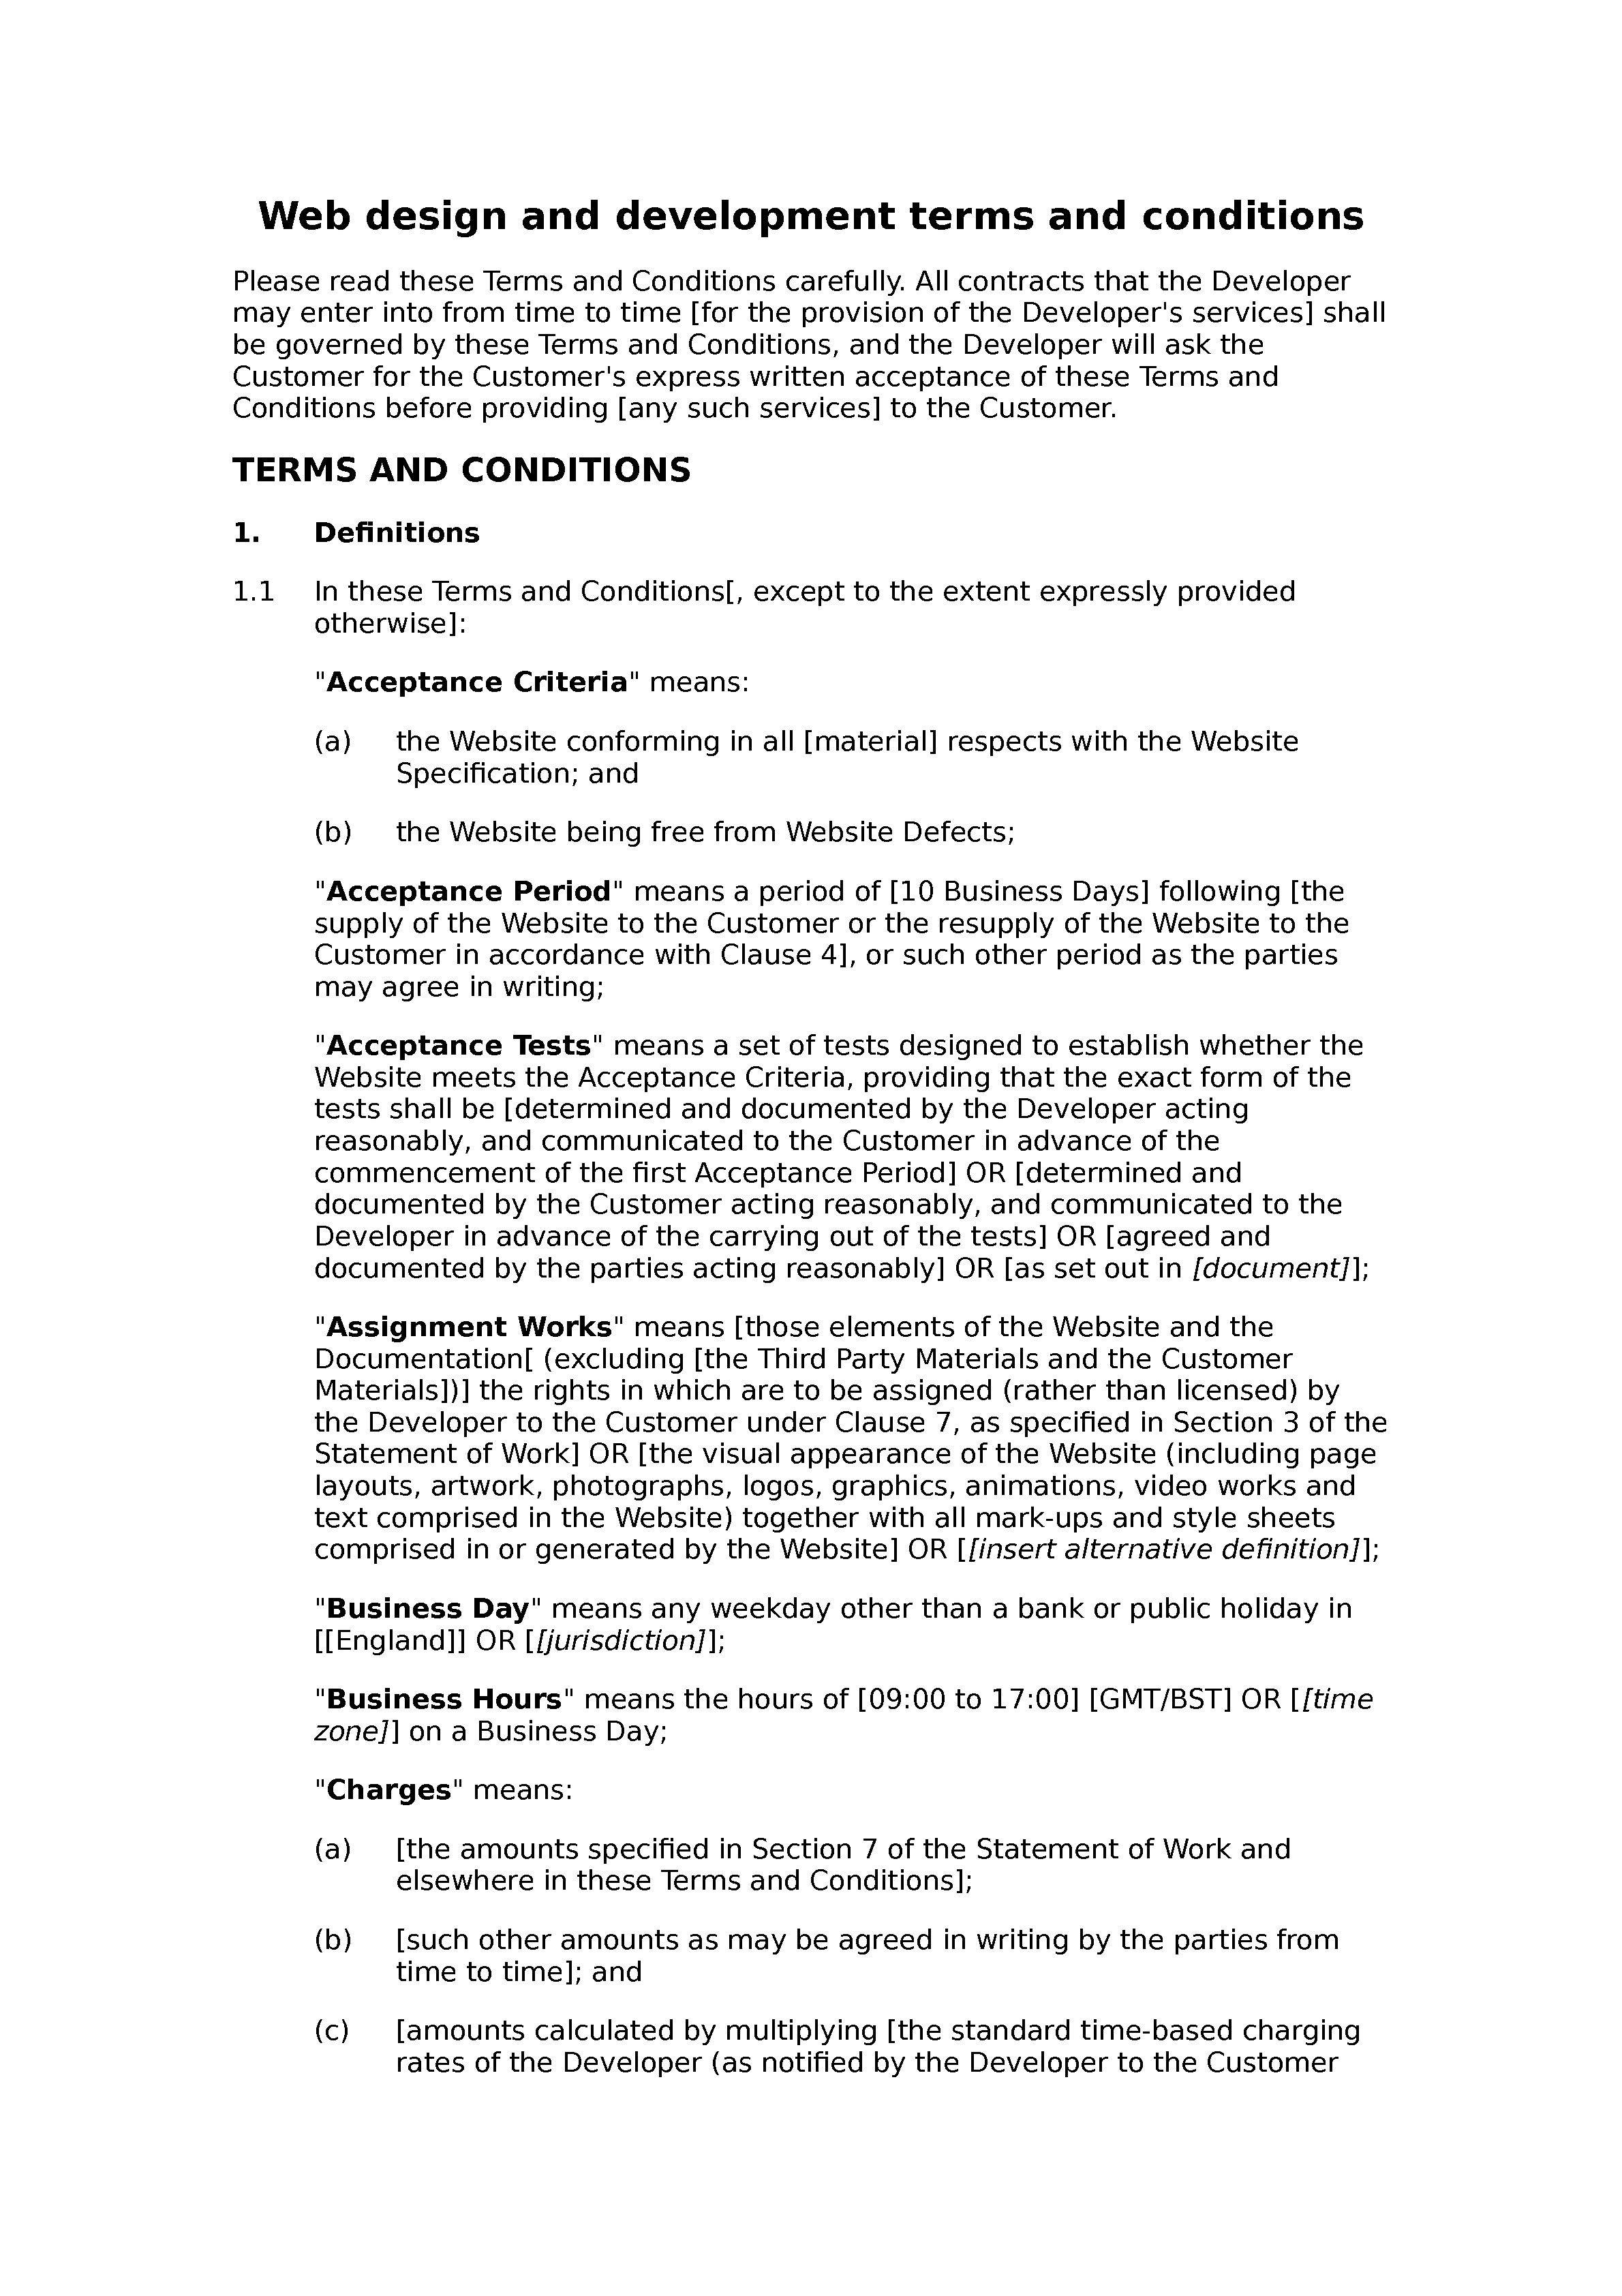 Web design and development terms and conditions (standard) document preview